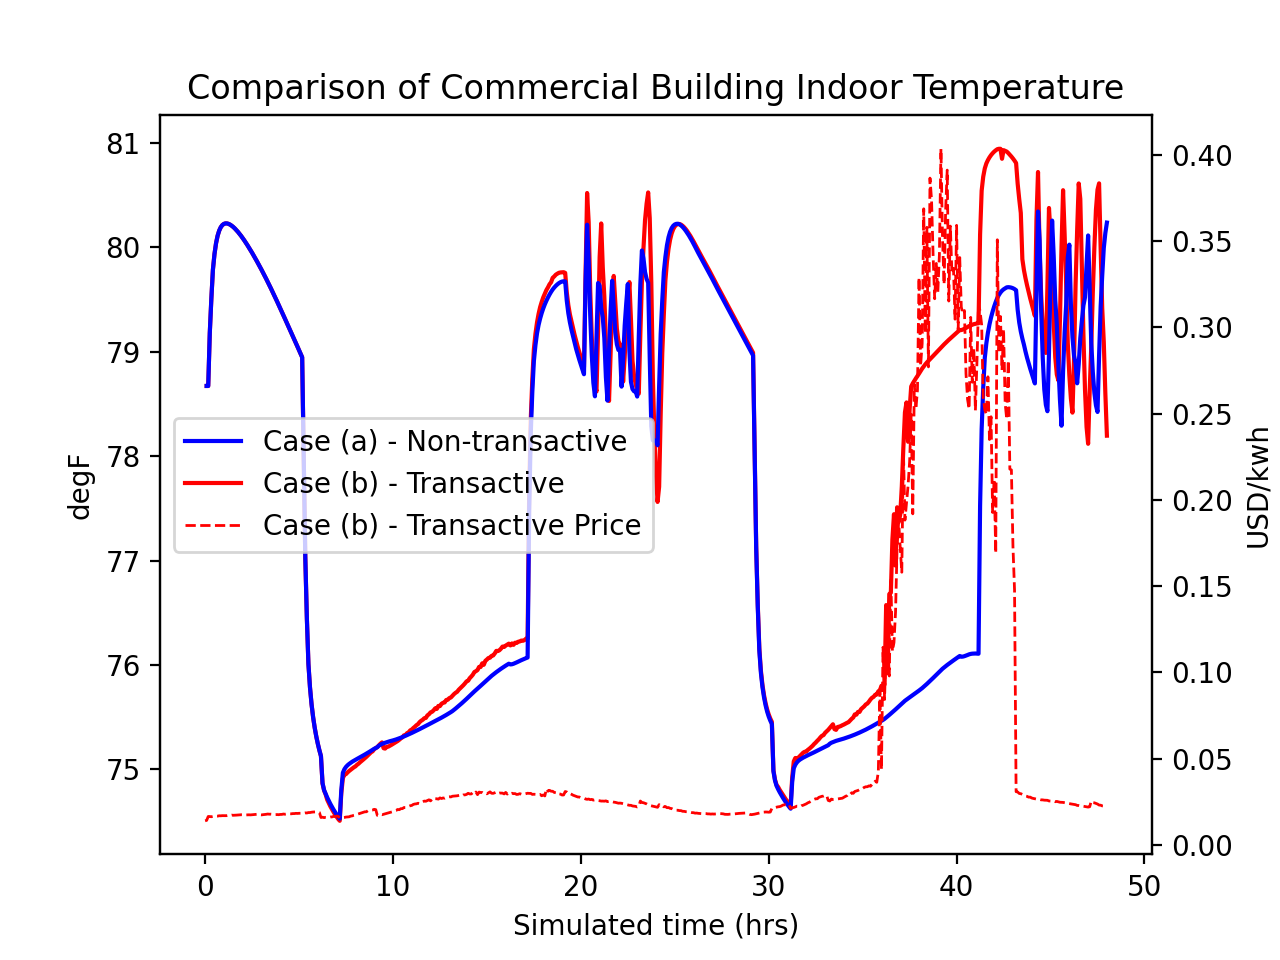 ../_images/validation_commercial_building_indoor_temperature.png